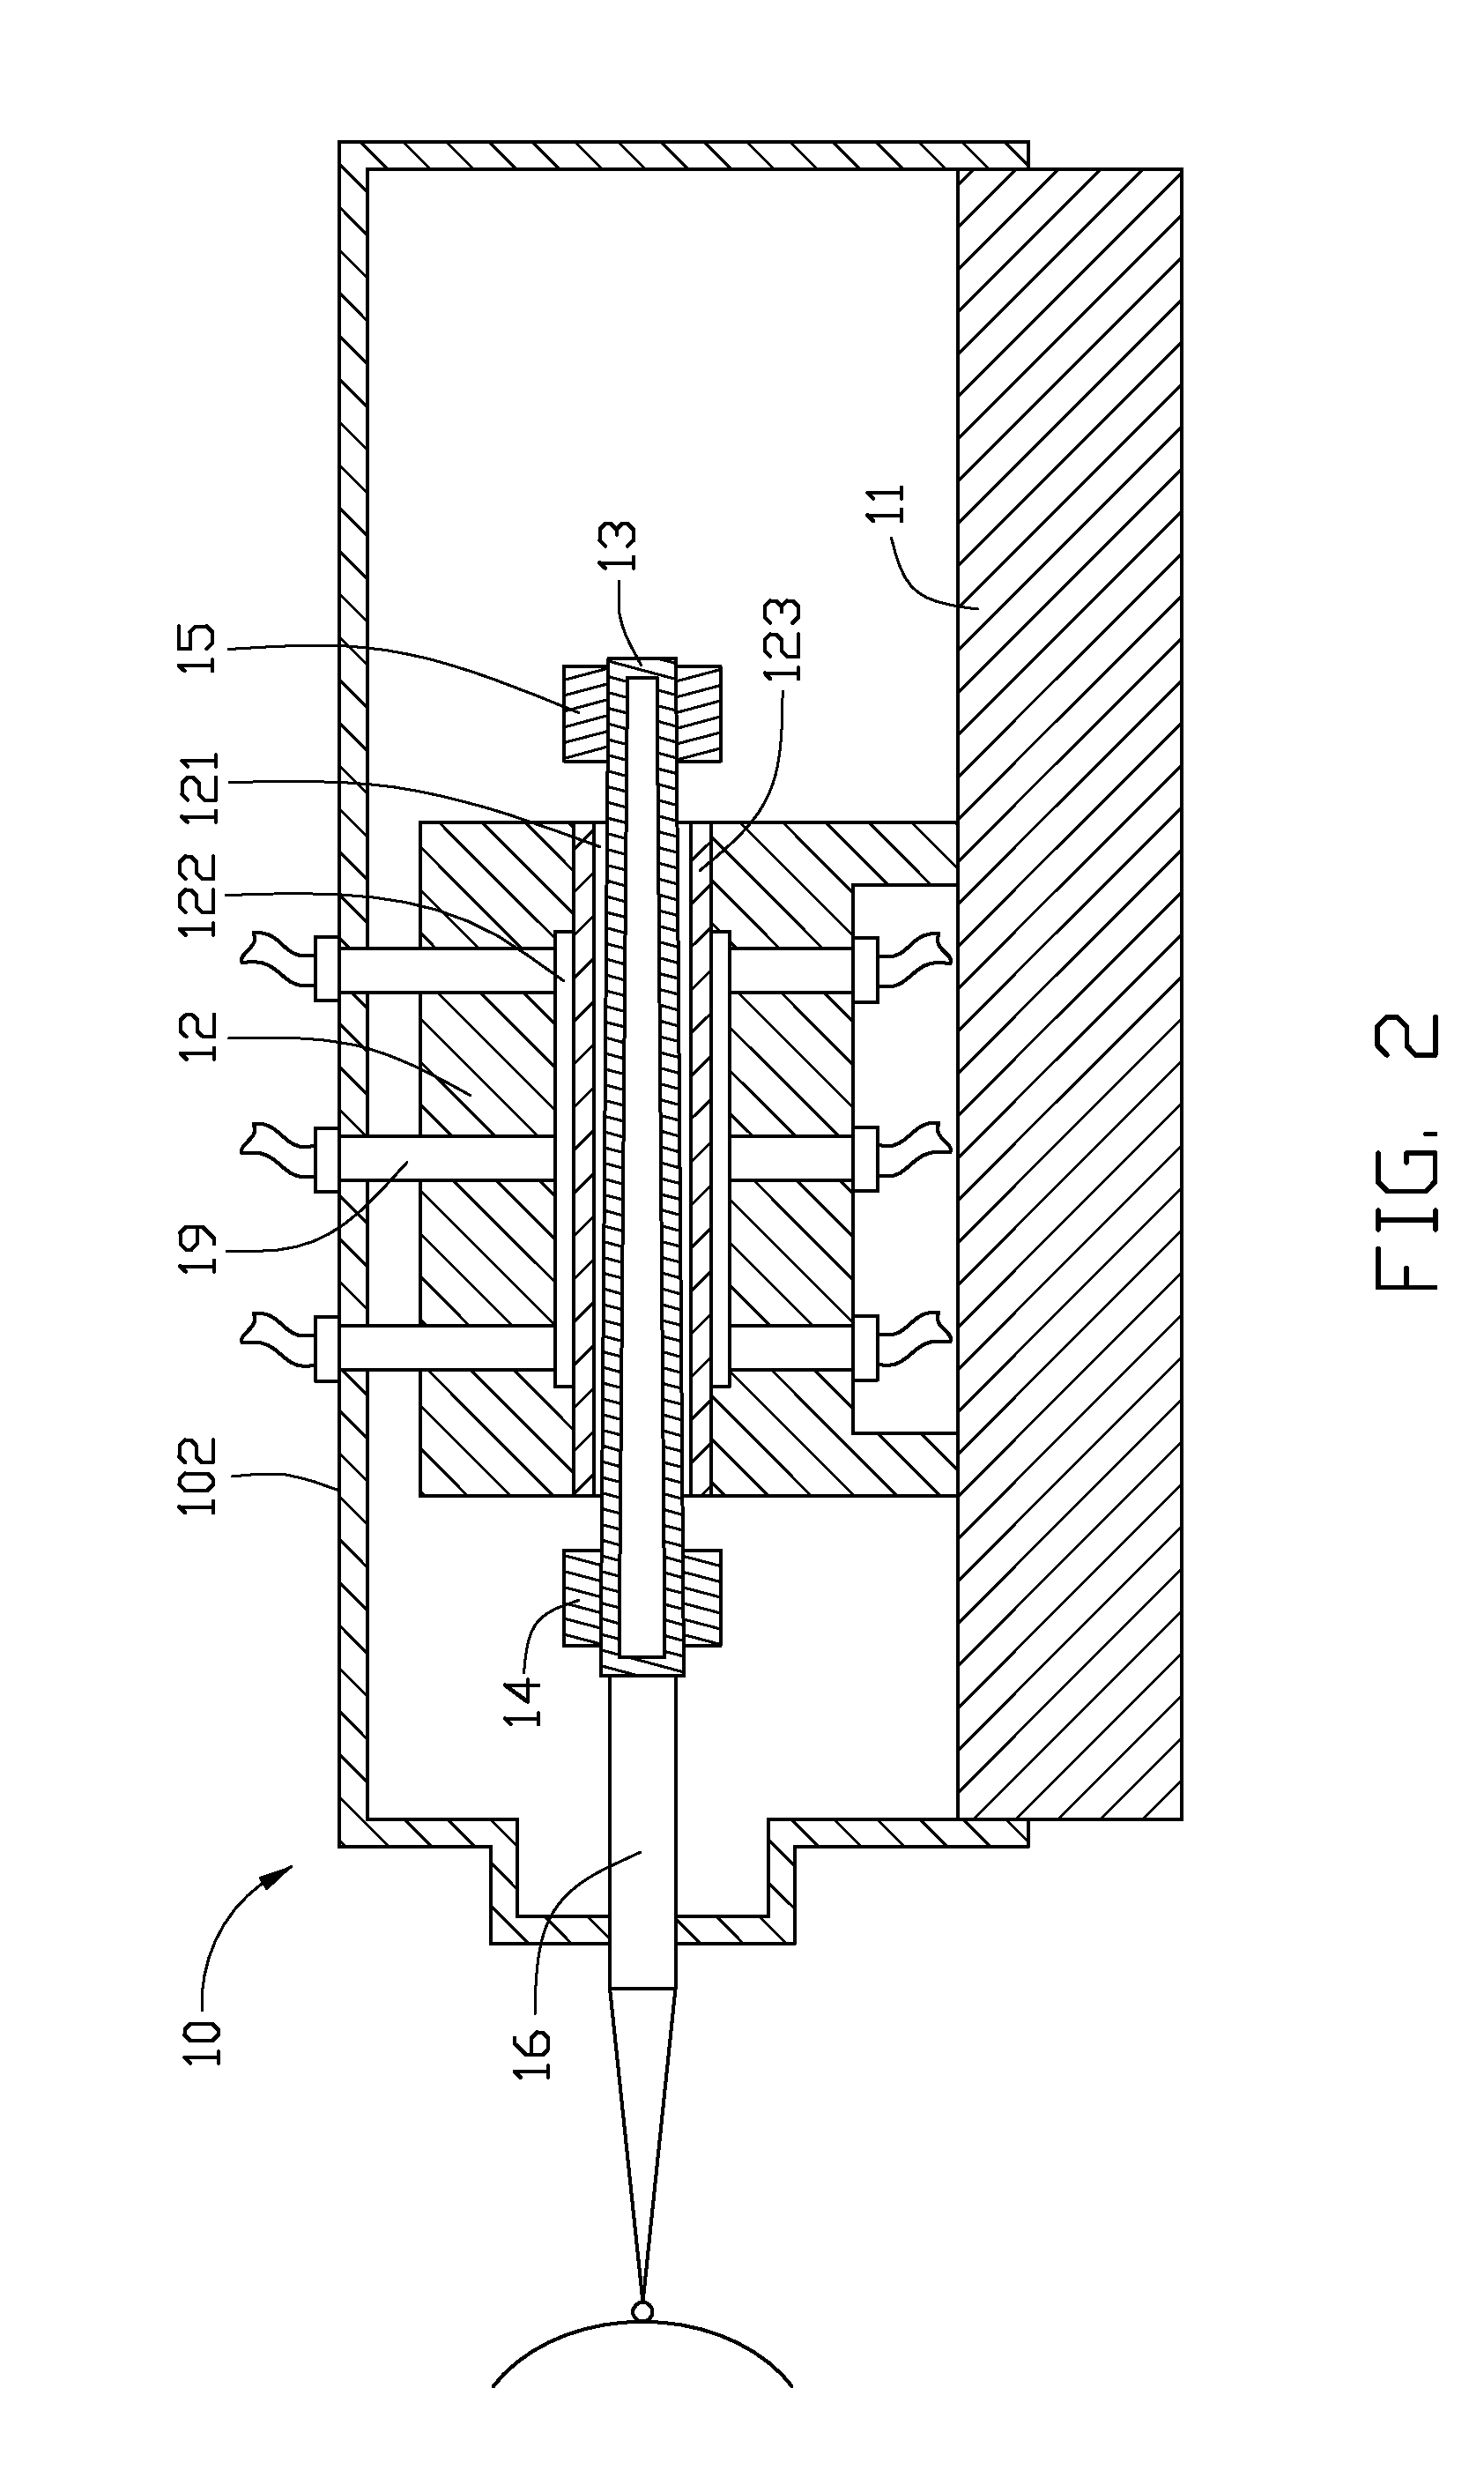 Contour measuring probe for measuring aspects of objects